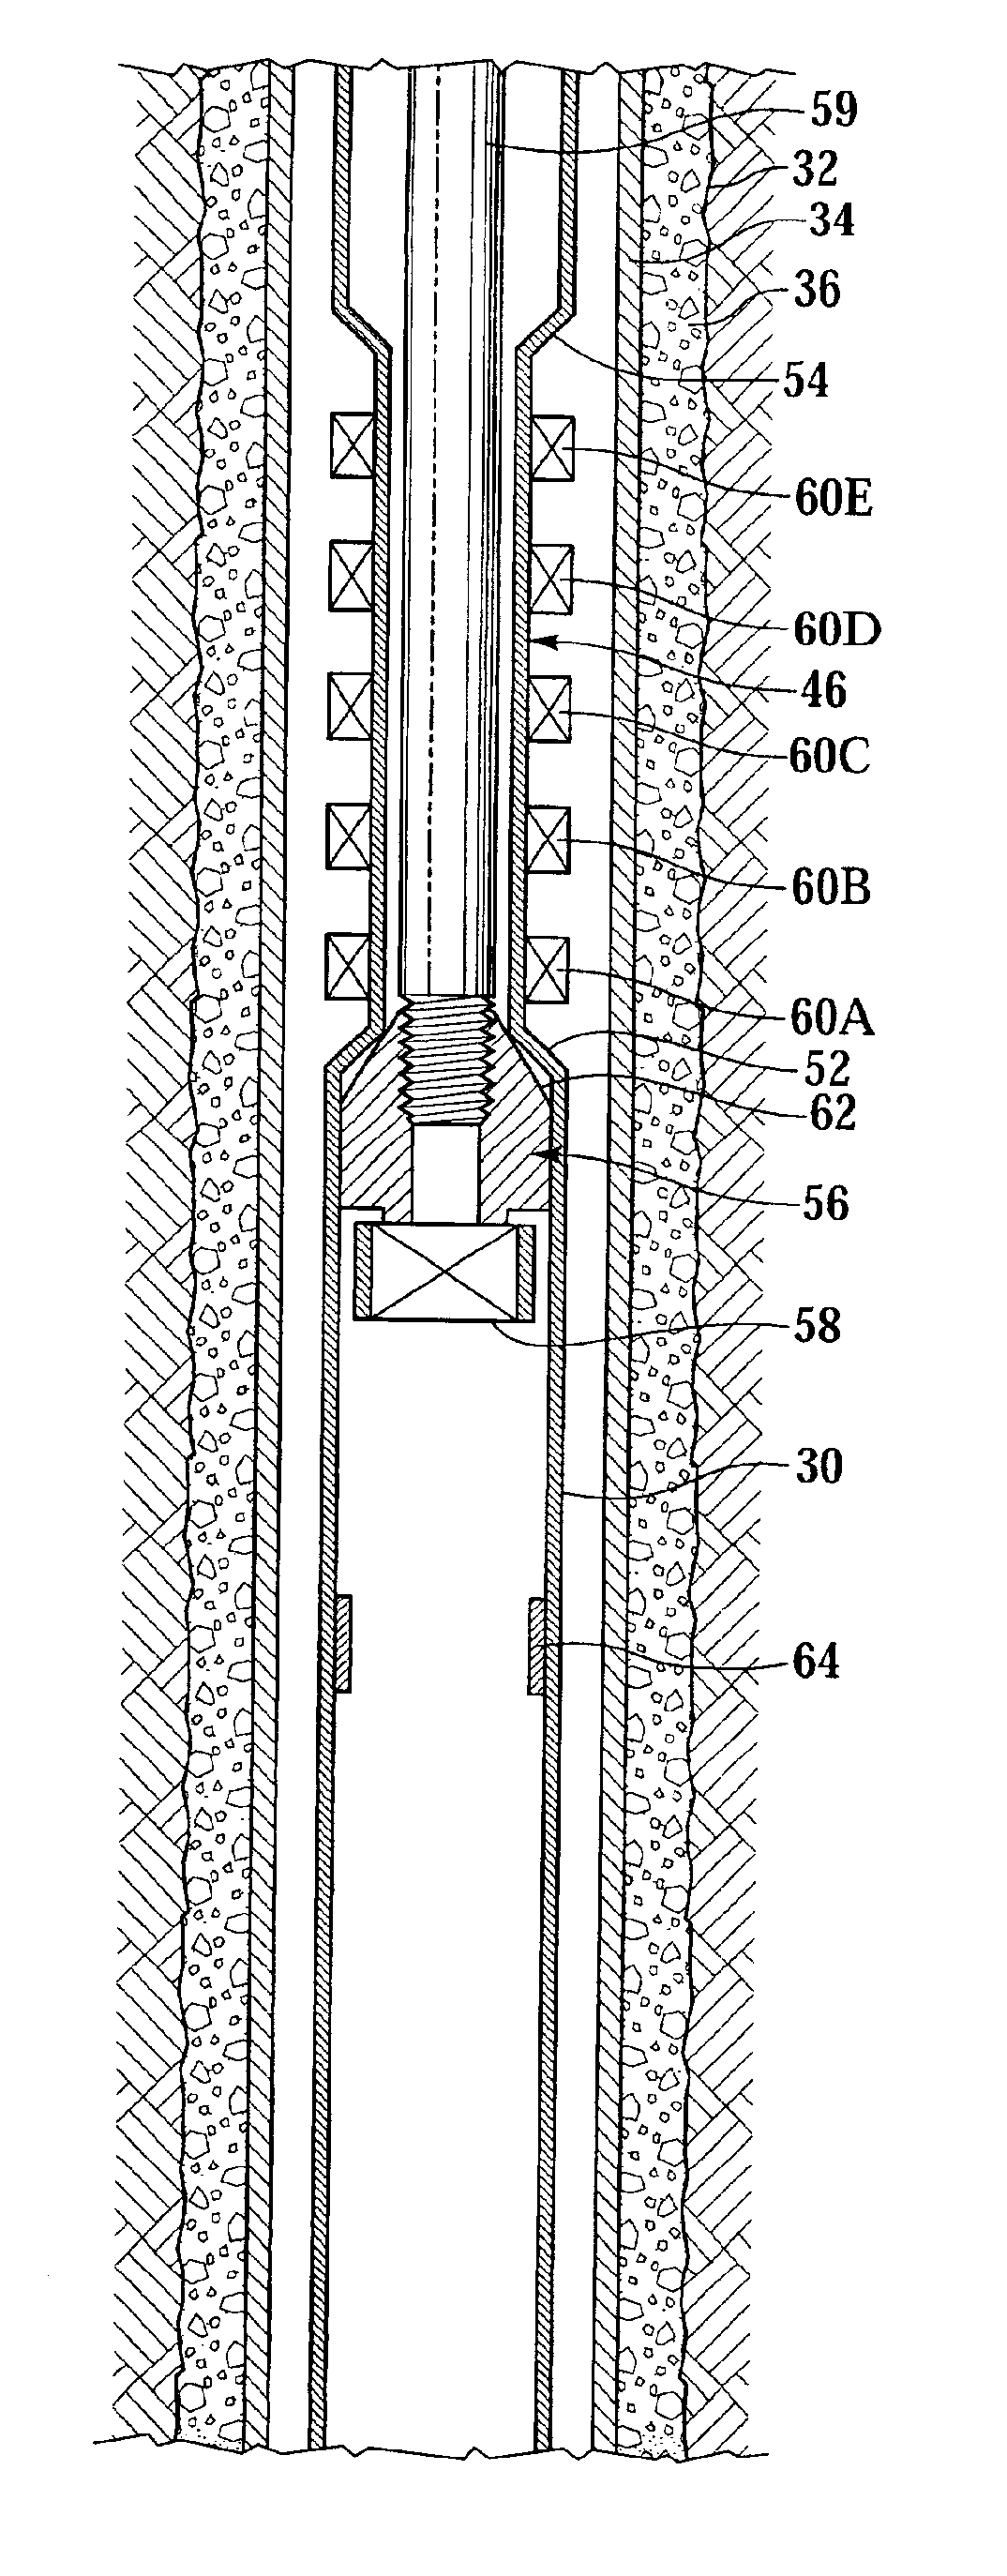 System and method for creating a fluid seal between production tubing and well casing